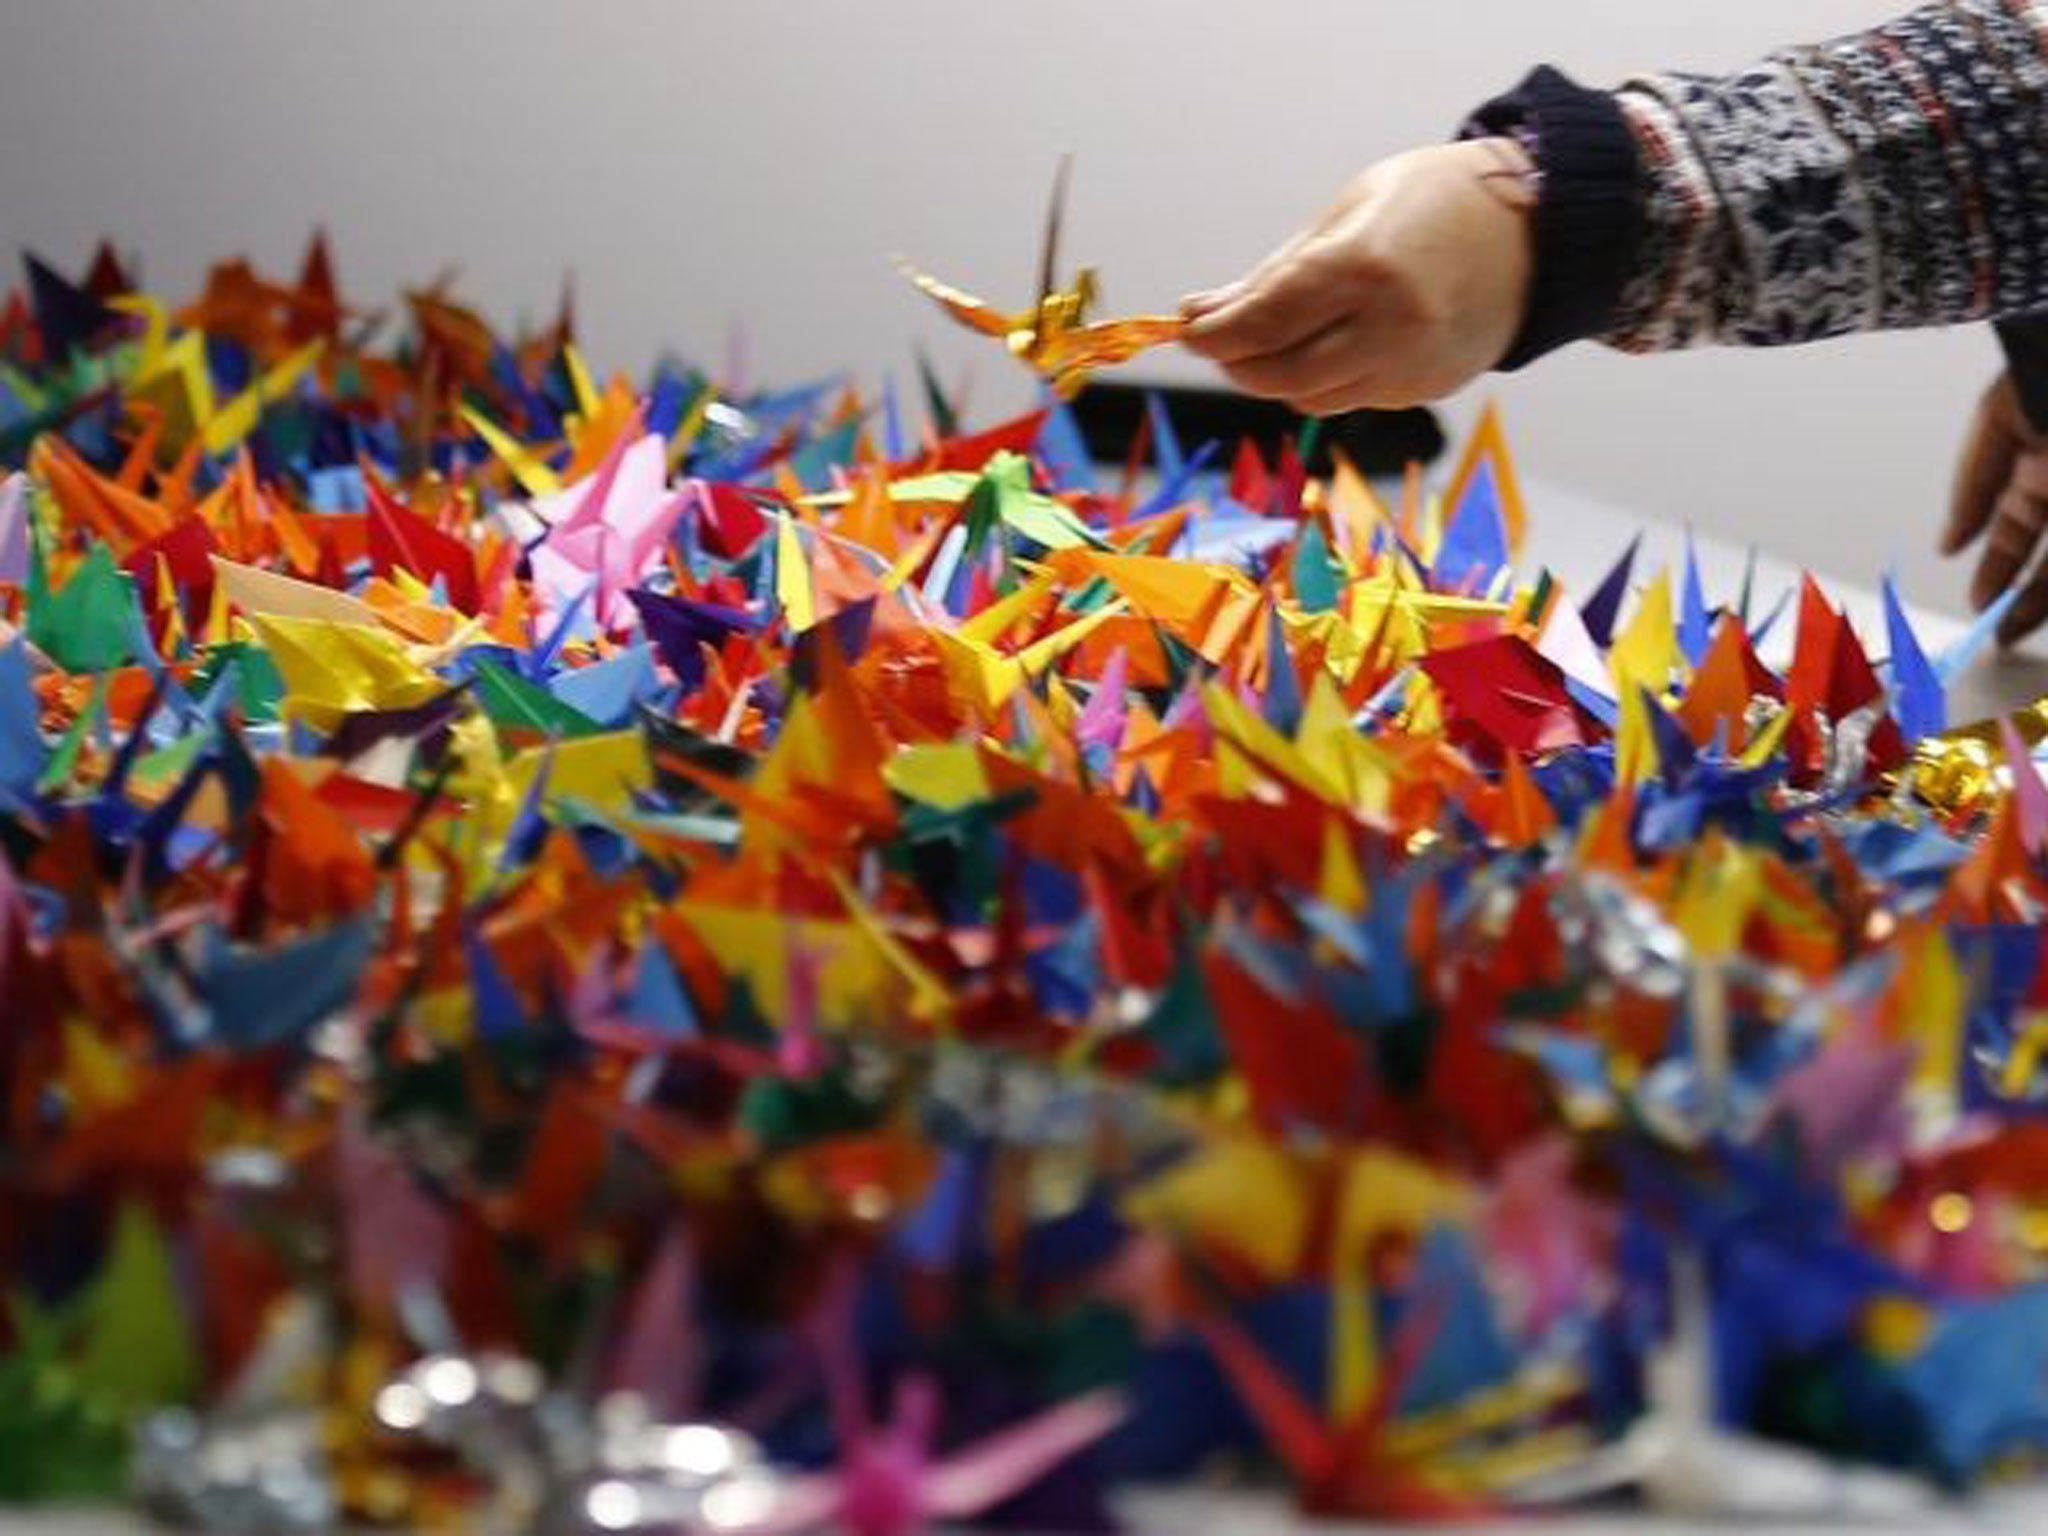 Paper cranes are supposed to be ephemeral, left to disintegrate and then to release their wishes for peaces